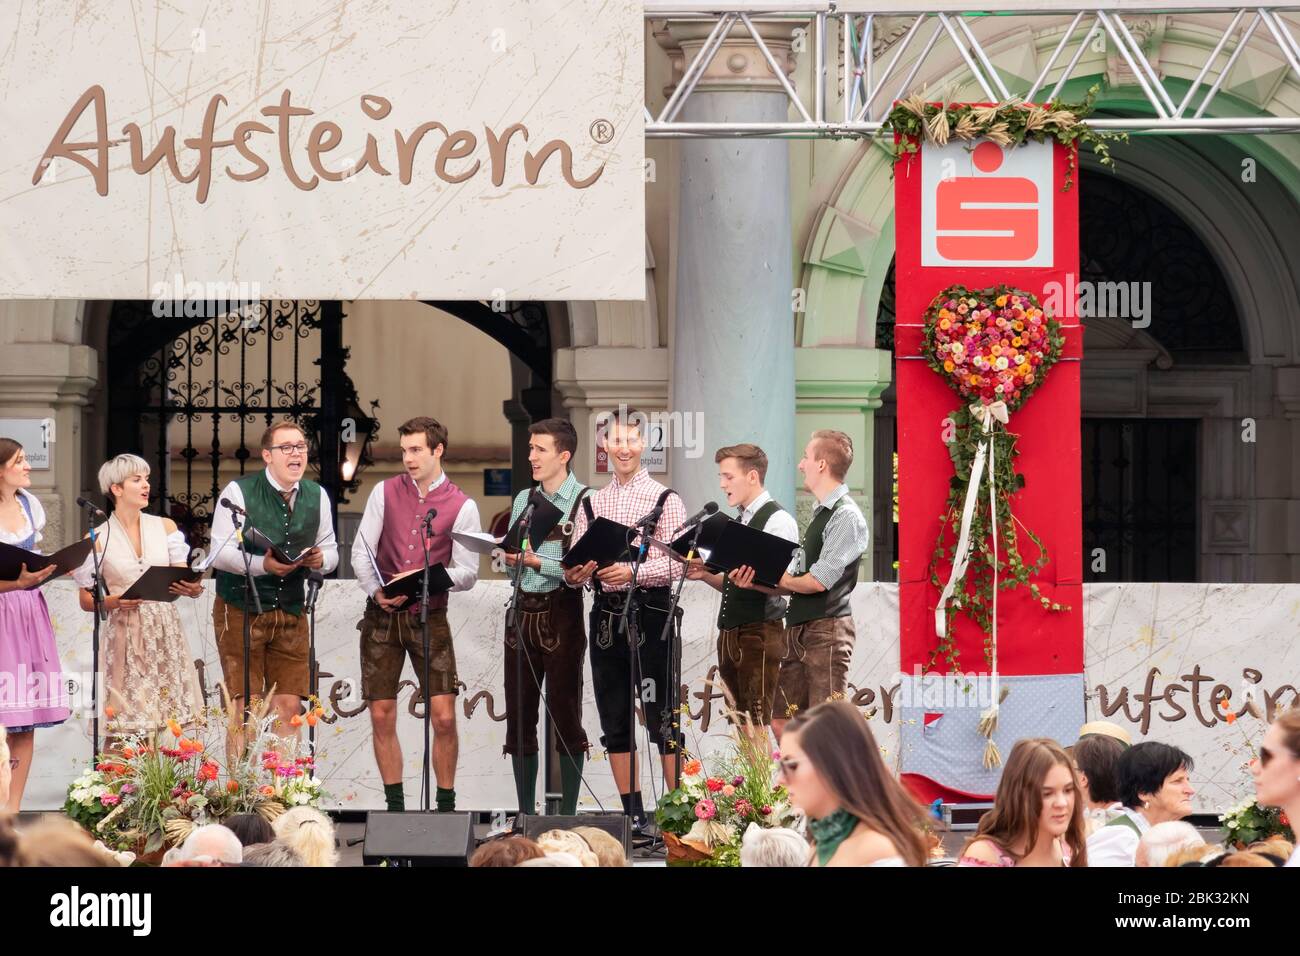 Graz/Austria - September 2019: annual autumn festival of Styrian folk culture (Aufsteirern). ?hoir of young people in traditional national costumes si Stock Photo